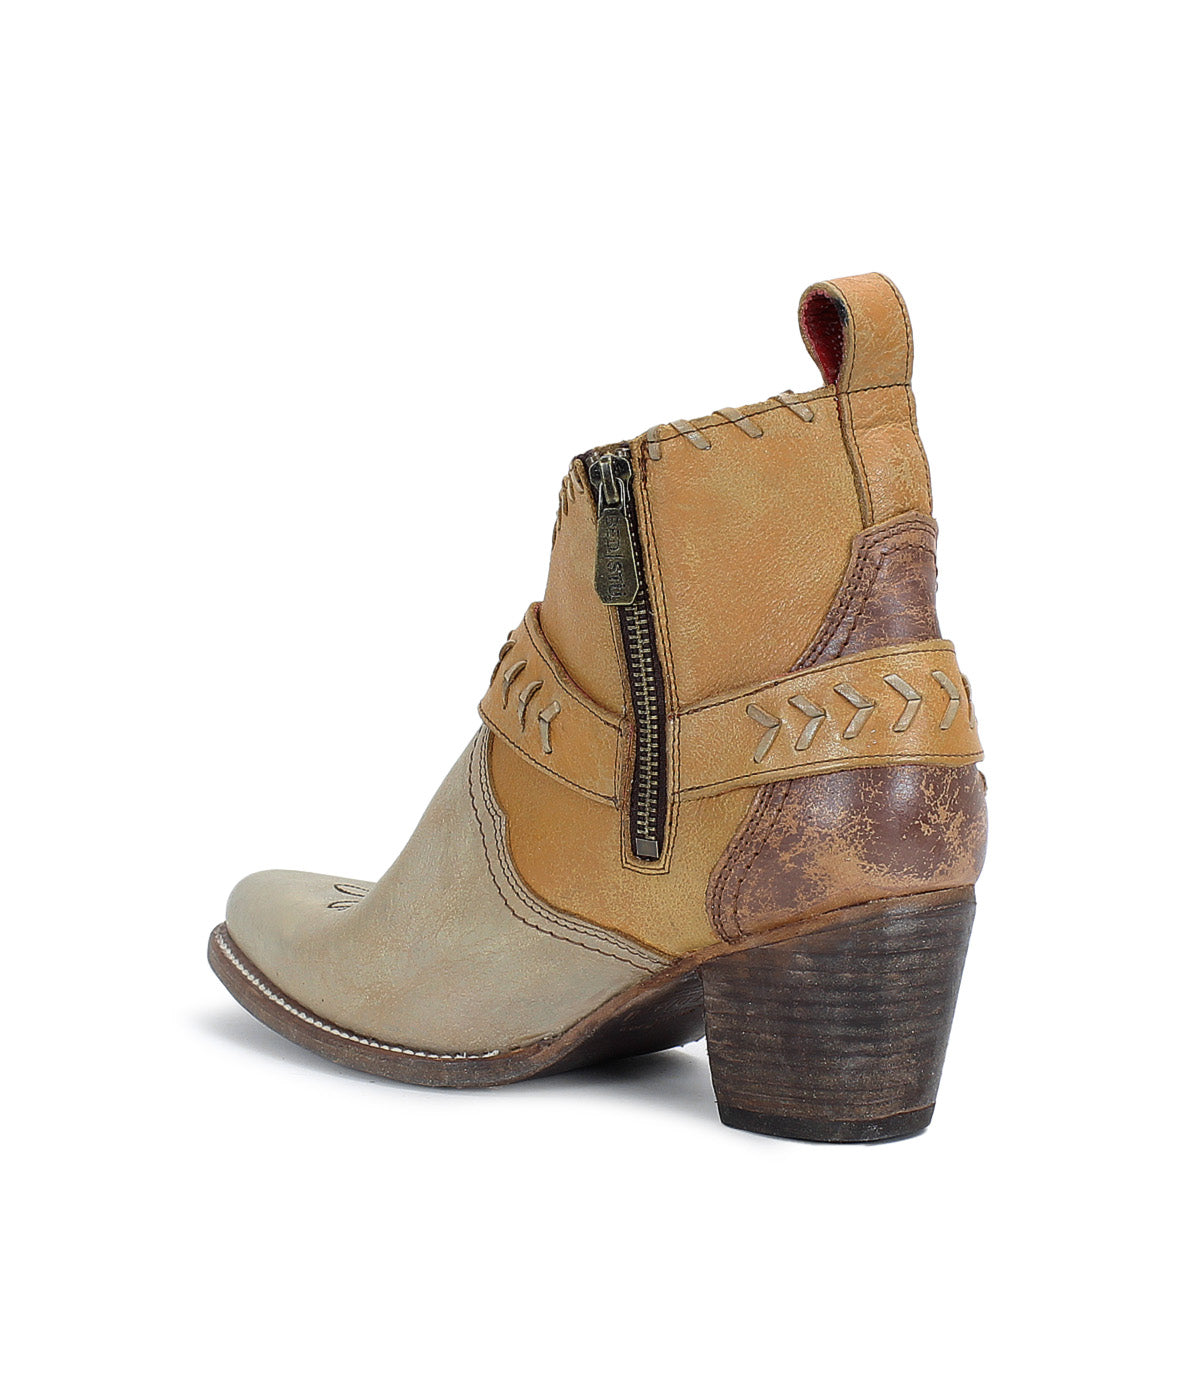 A women's ankle boot in tan and brown called the Tania by Bed Stu.